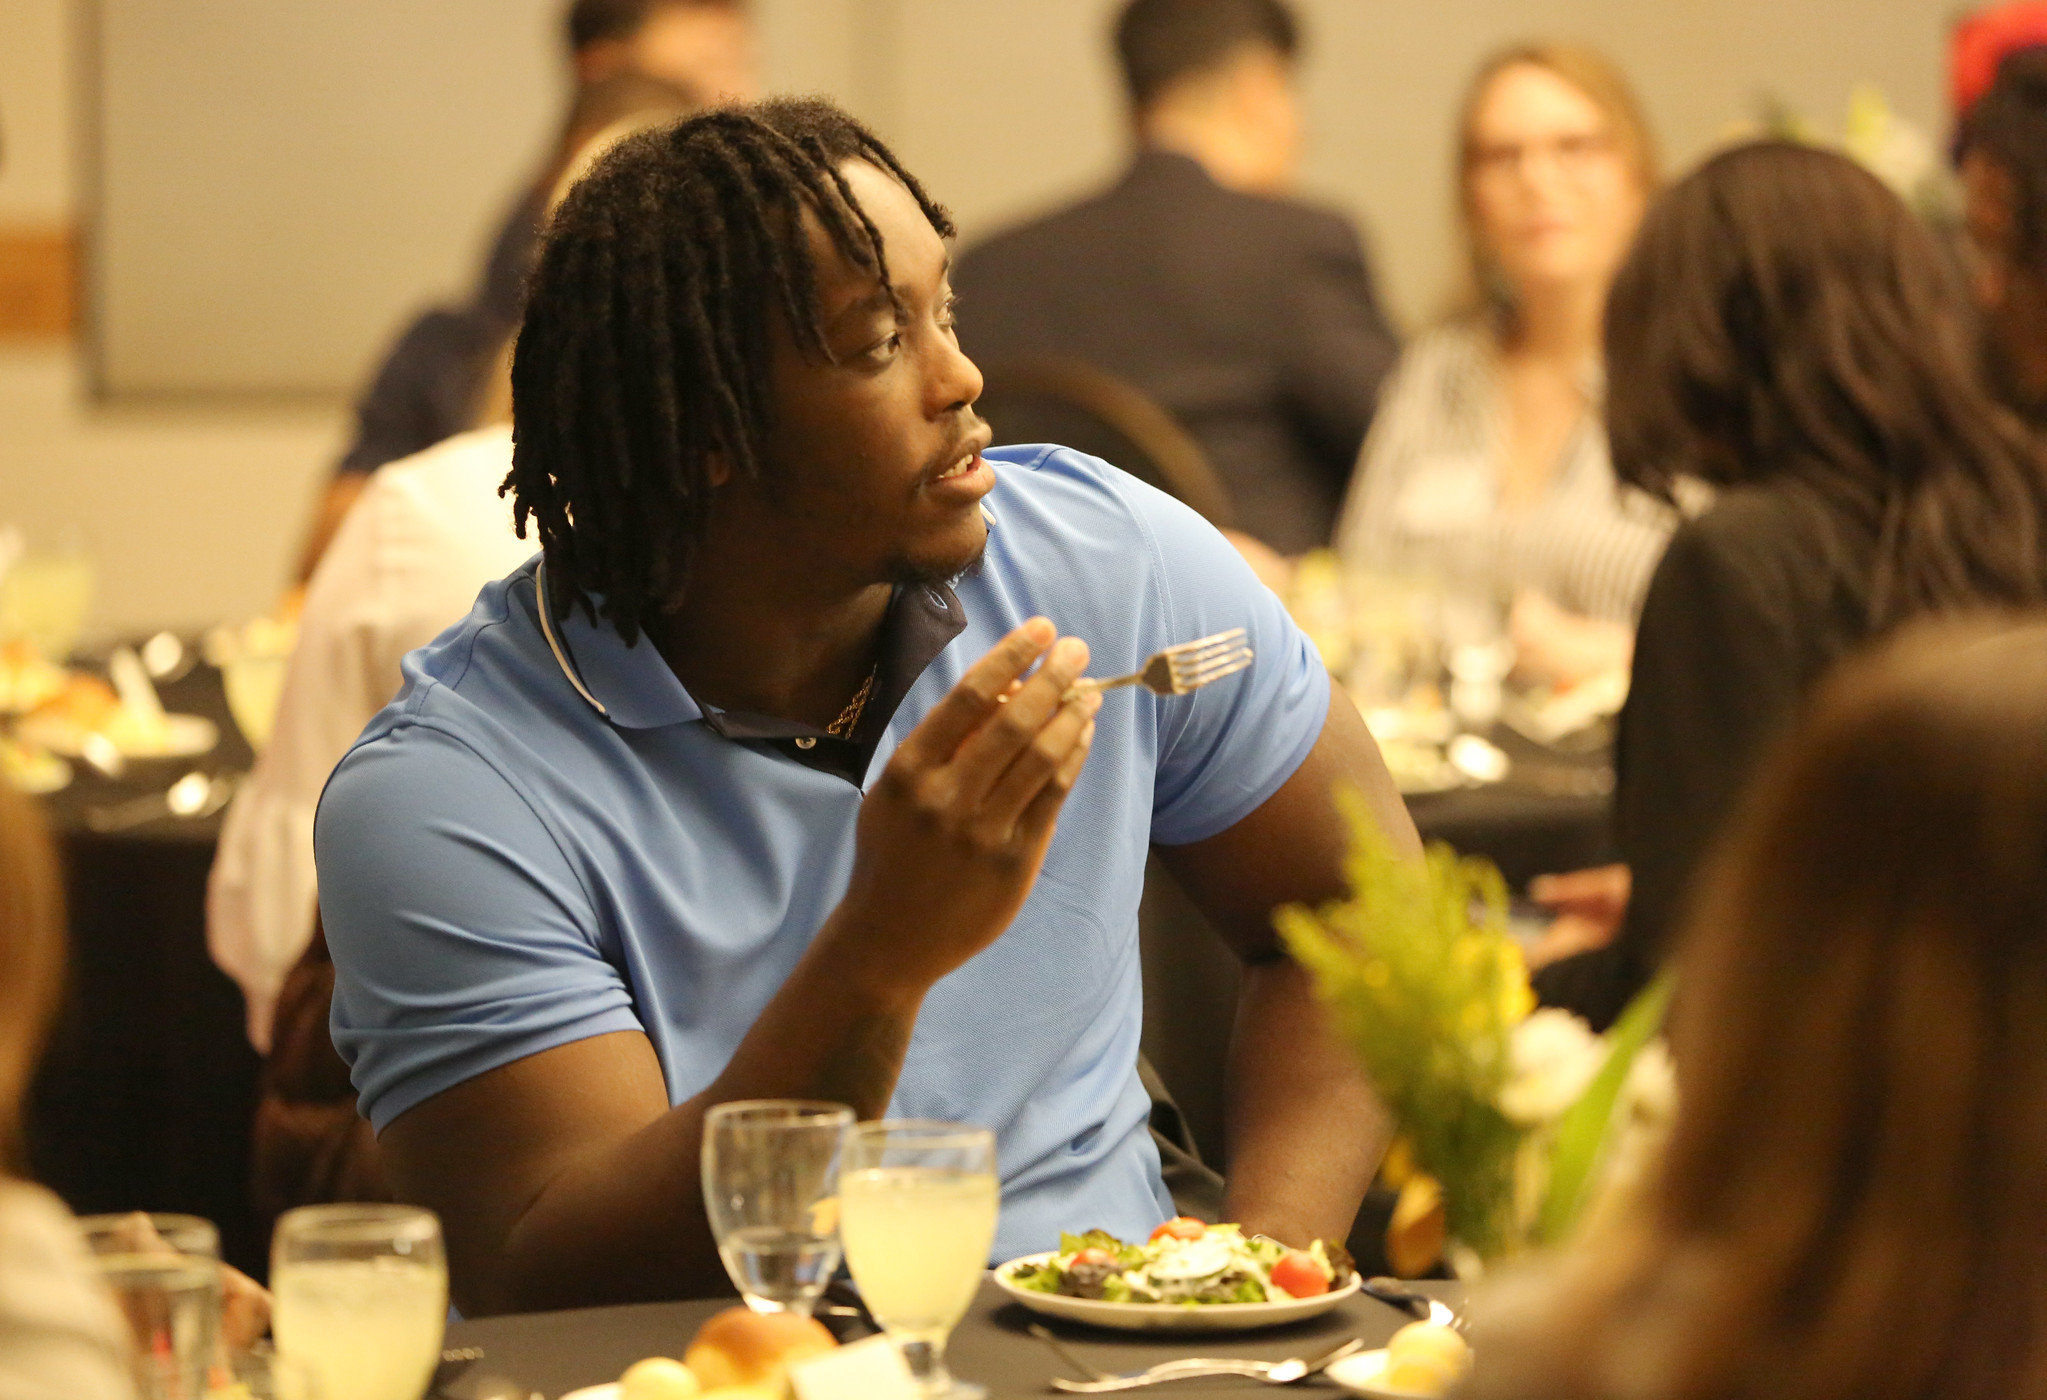 Darius Robinson's Dedication to Football, Hospitality Management Degree Program Have Been Evident as a Tiger (click to read)